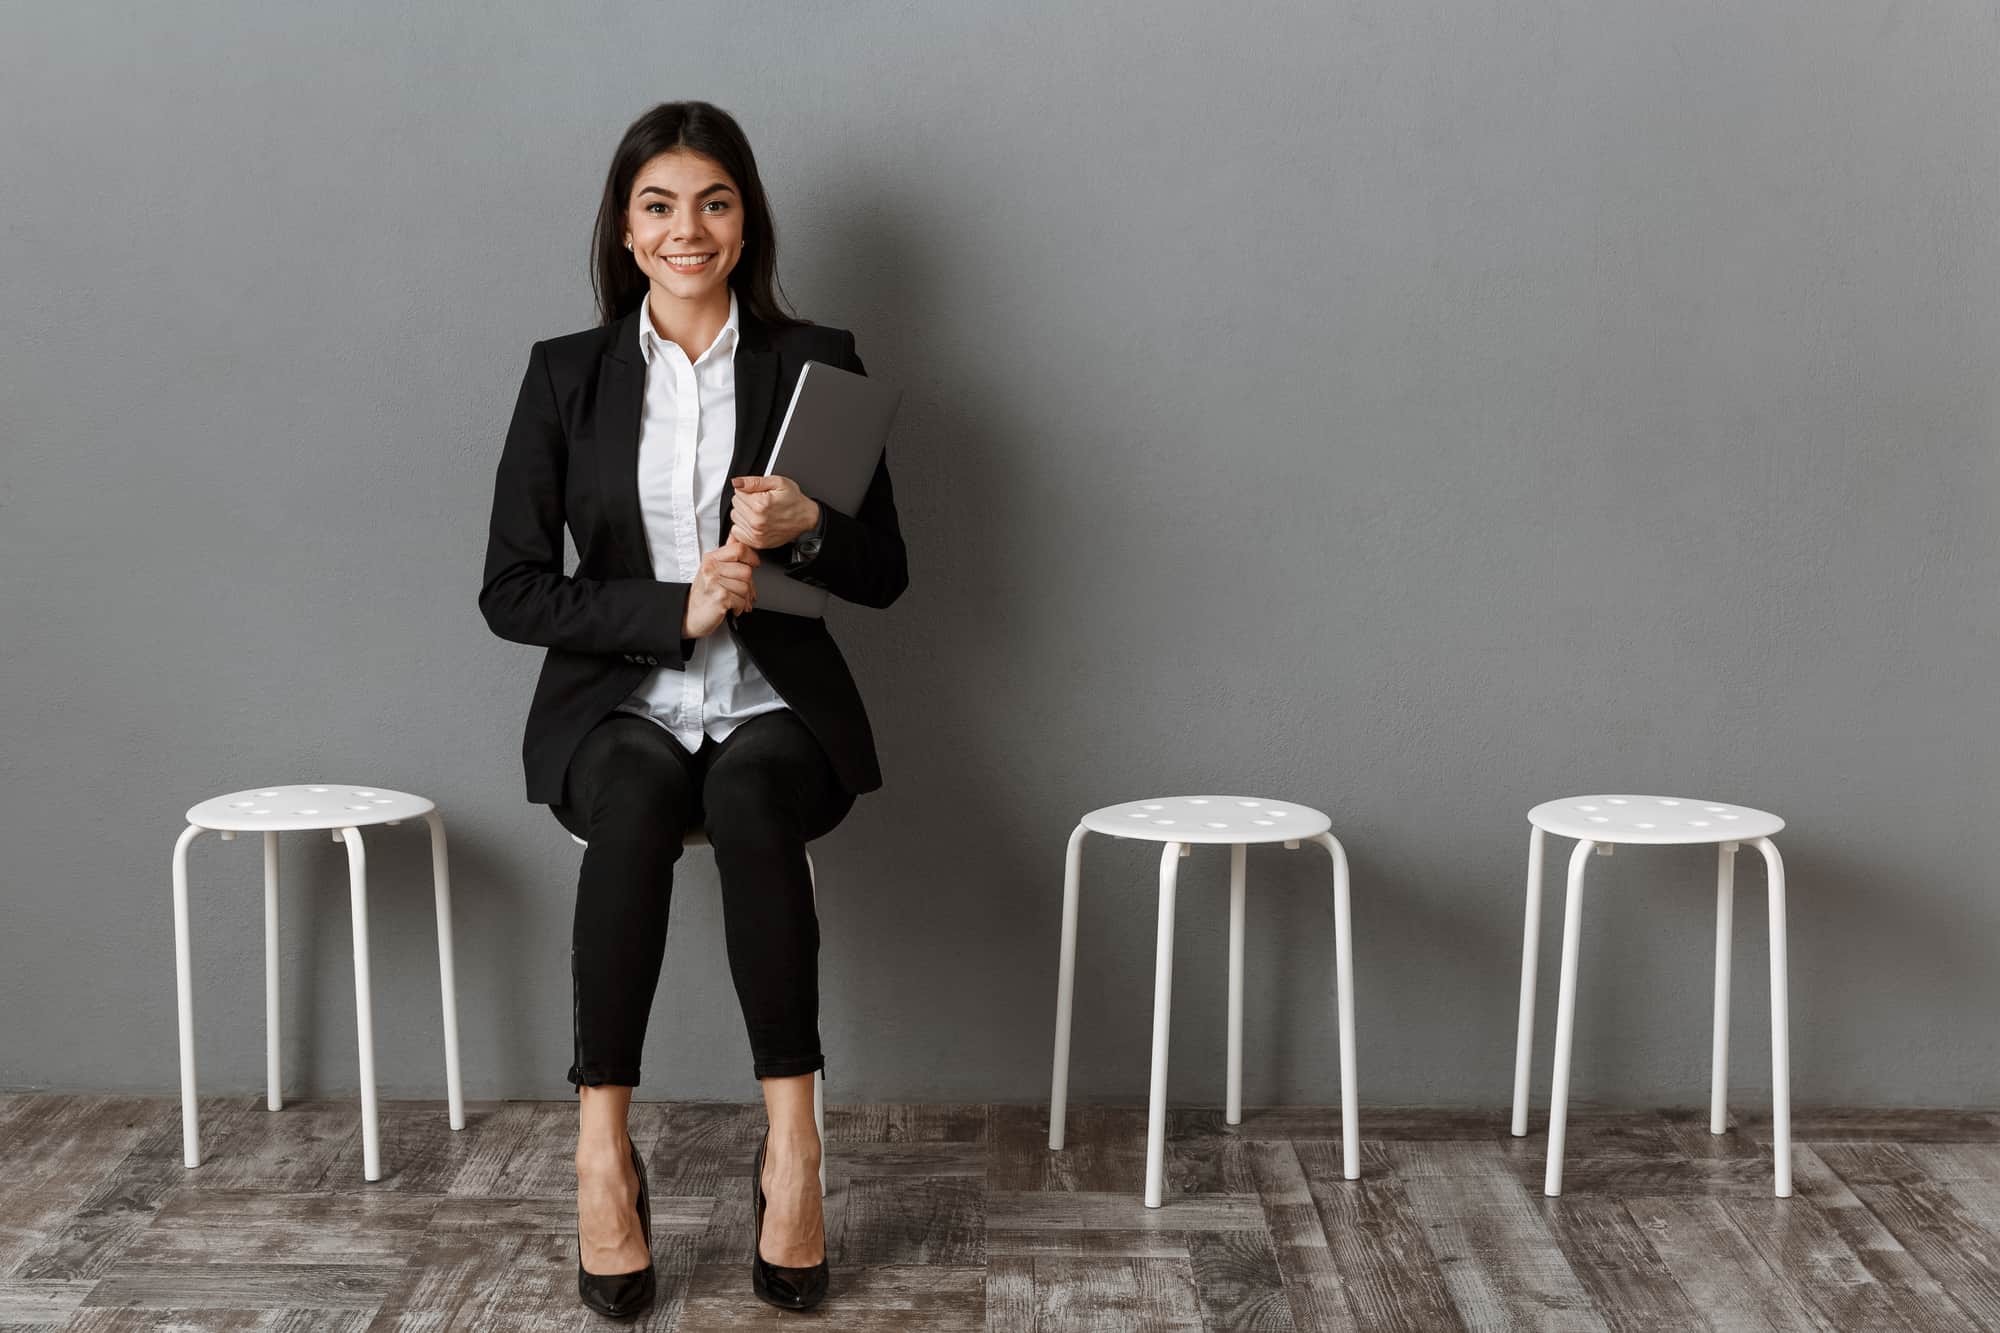 How to Prepare for an Interview: 15 Tips